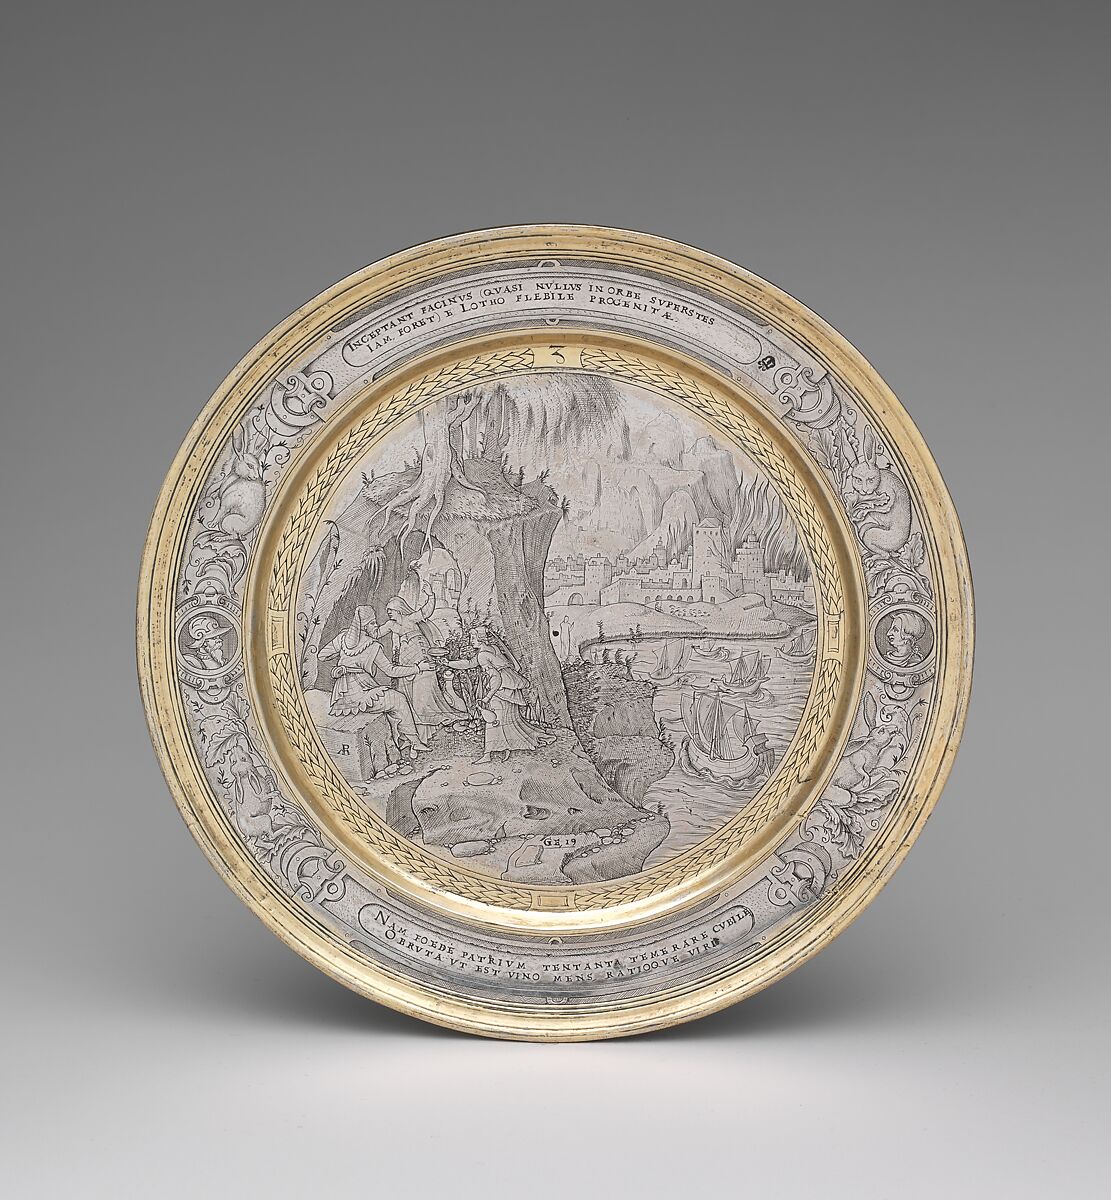 Lot Seduced by his Daughters, P.M., Silver, partly gilded, probably British